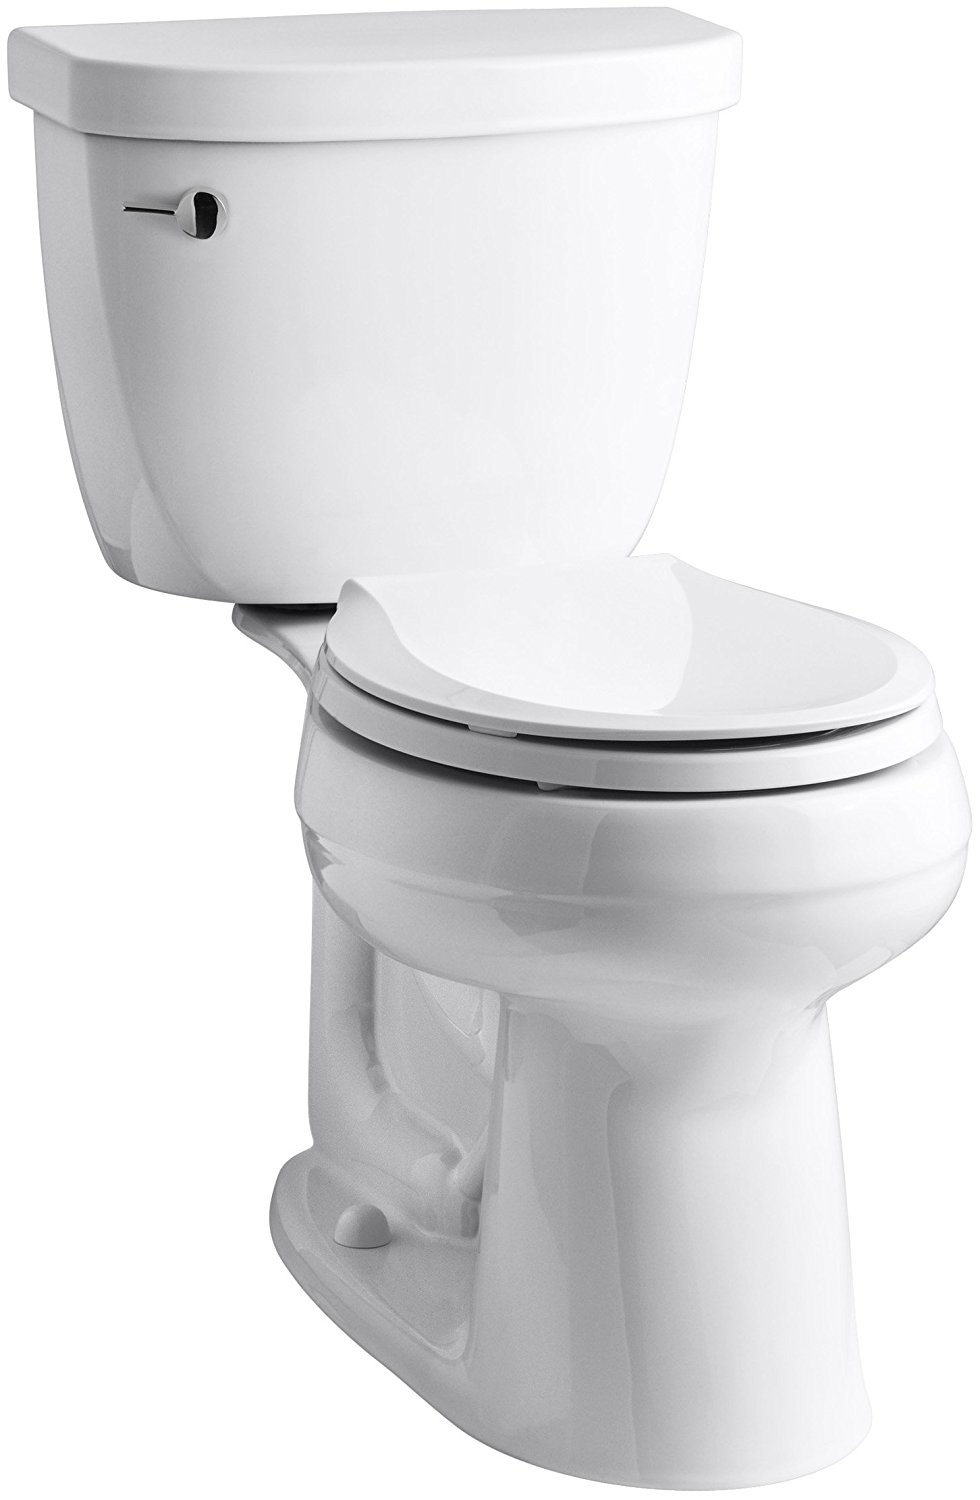 KOHLER K-3851-0 Cimarron Comfort Height Two-Piece Round-Front 1.28 GPF Toilet with Aqua Piston Flush Technology, 10-Inch Rough-In and Left-Hand Trip Lever, White